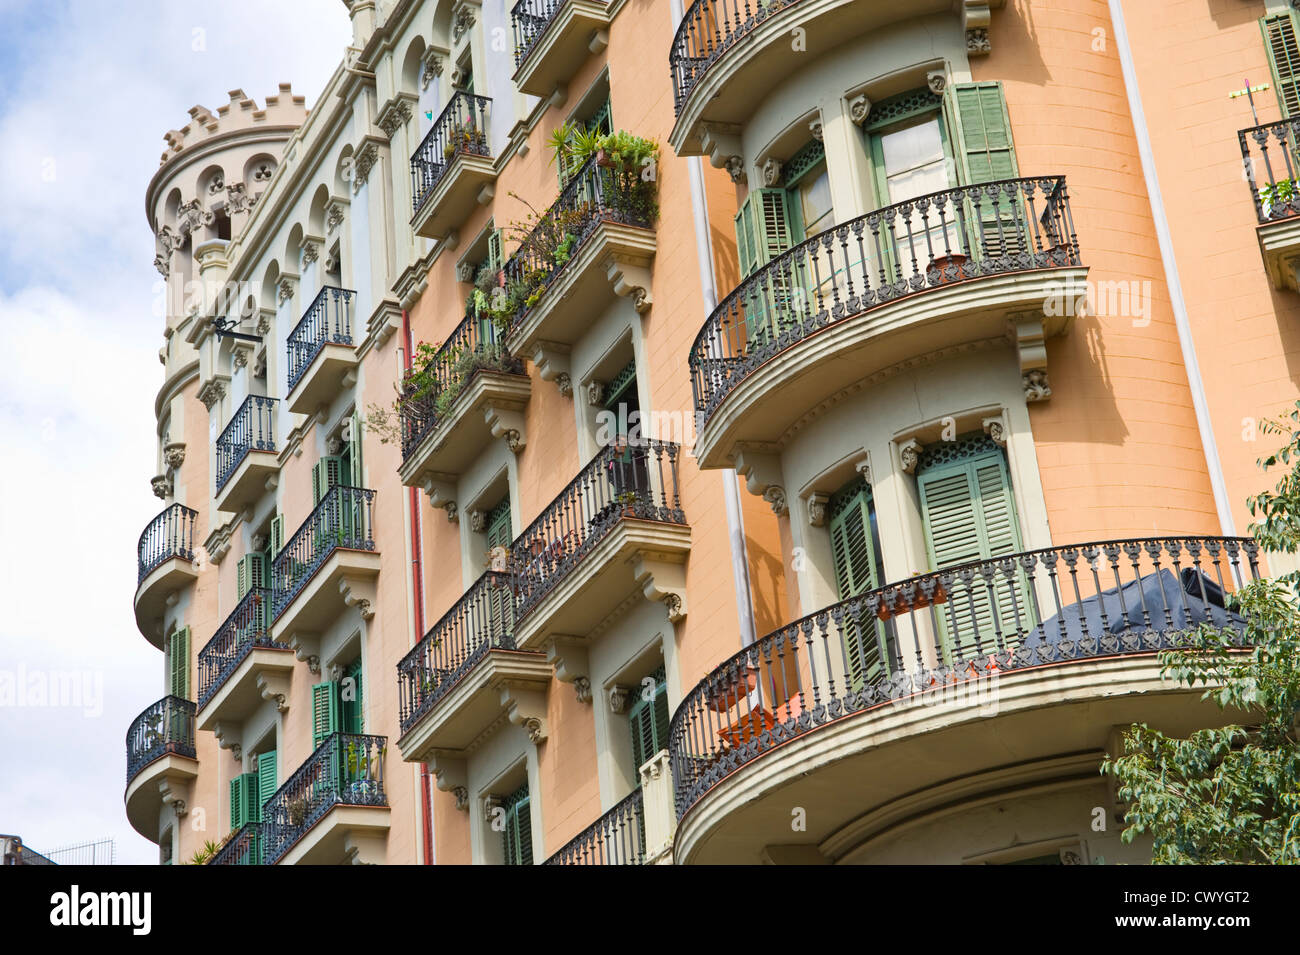 Apartments with wrought iron balconies and exterior wooden shutters in Barcelona Catalonia Spain ES Stock Photo